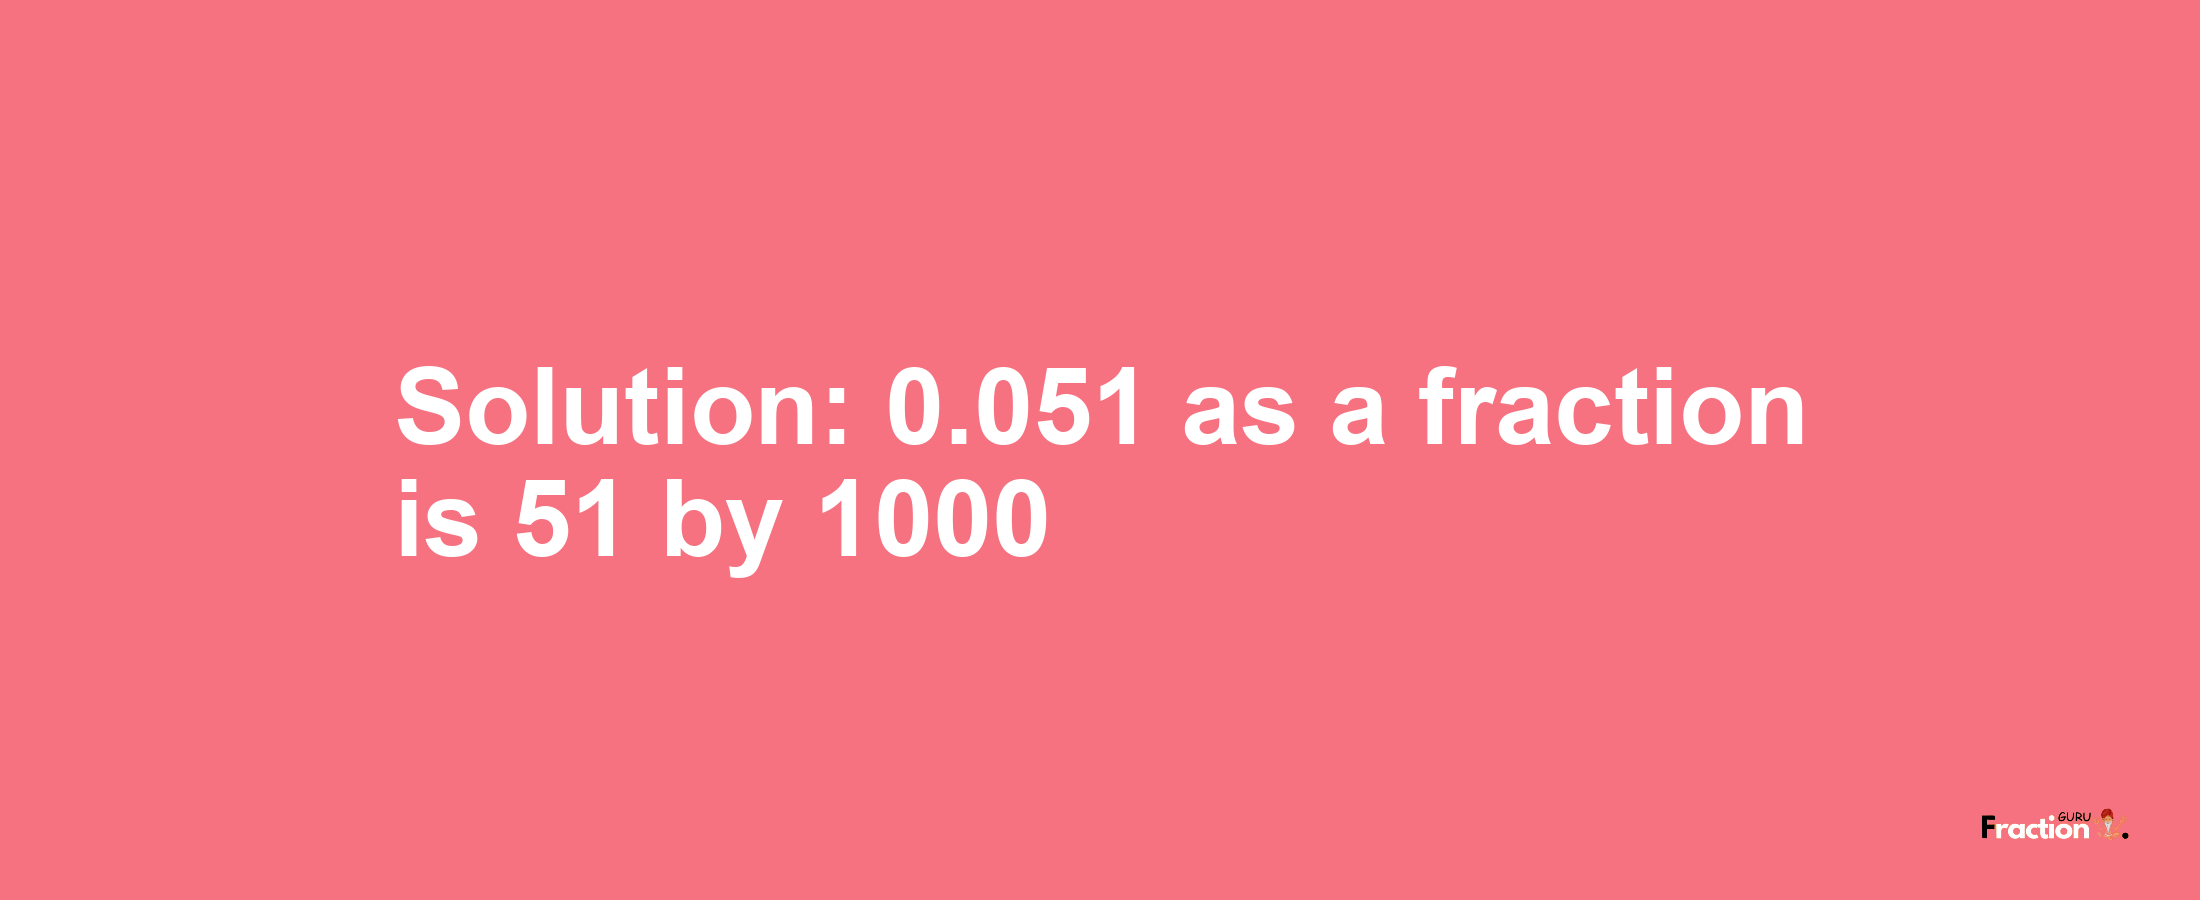 Solution:0.051 as a fraction is 51/1000